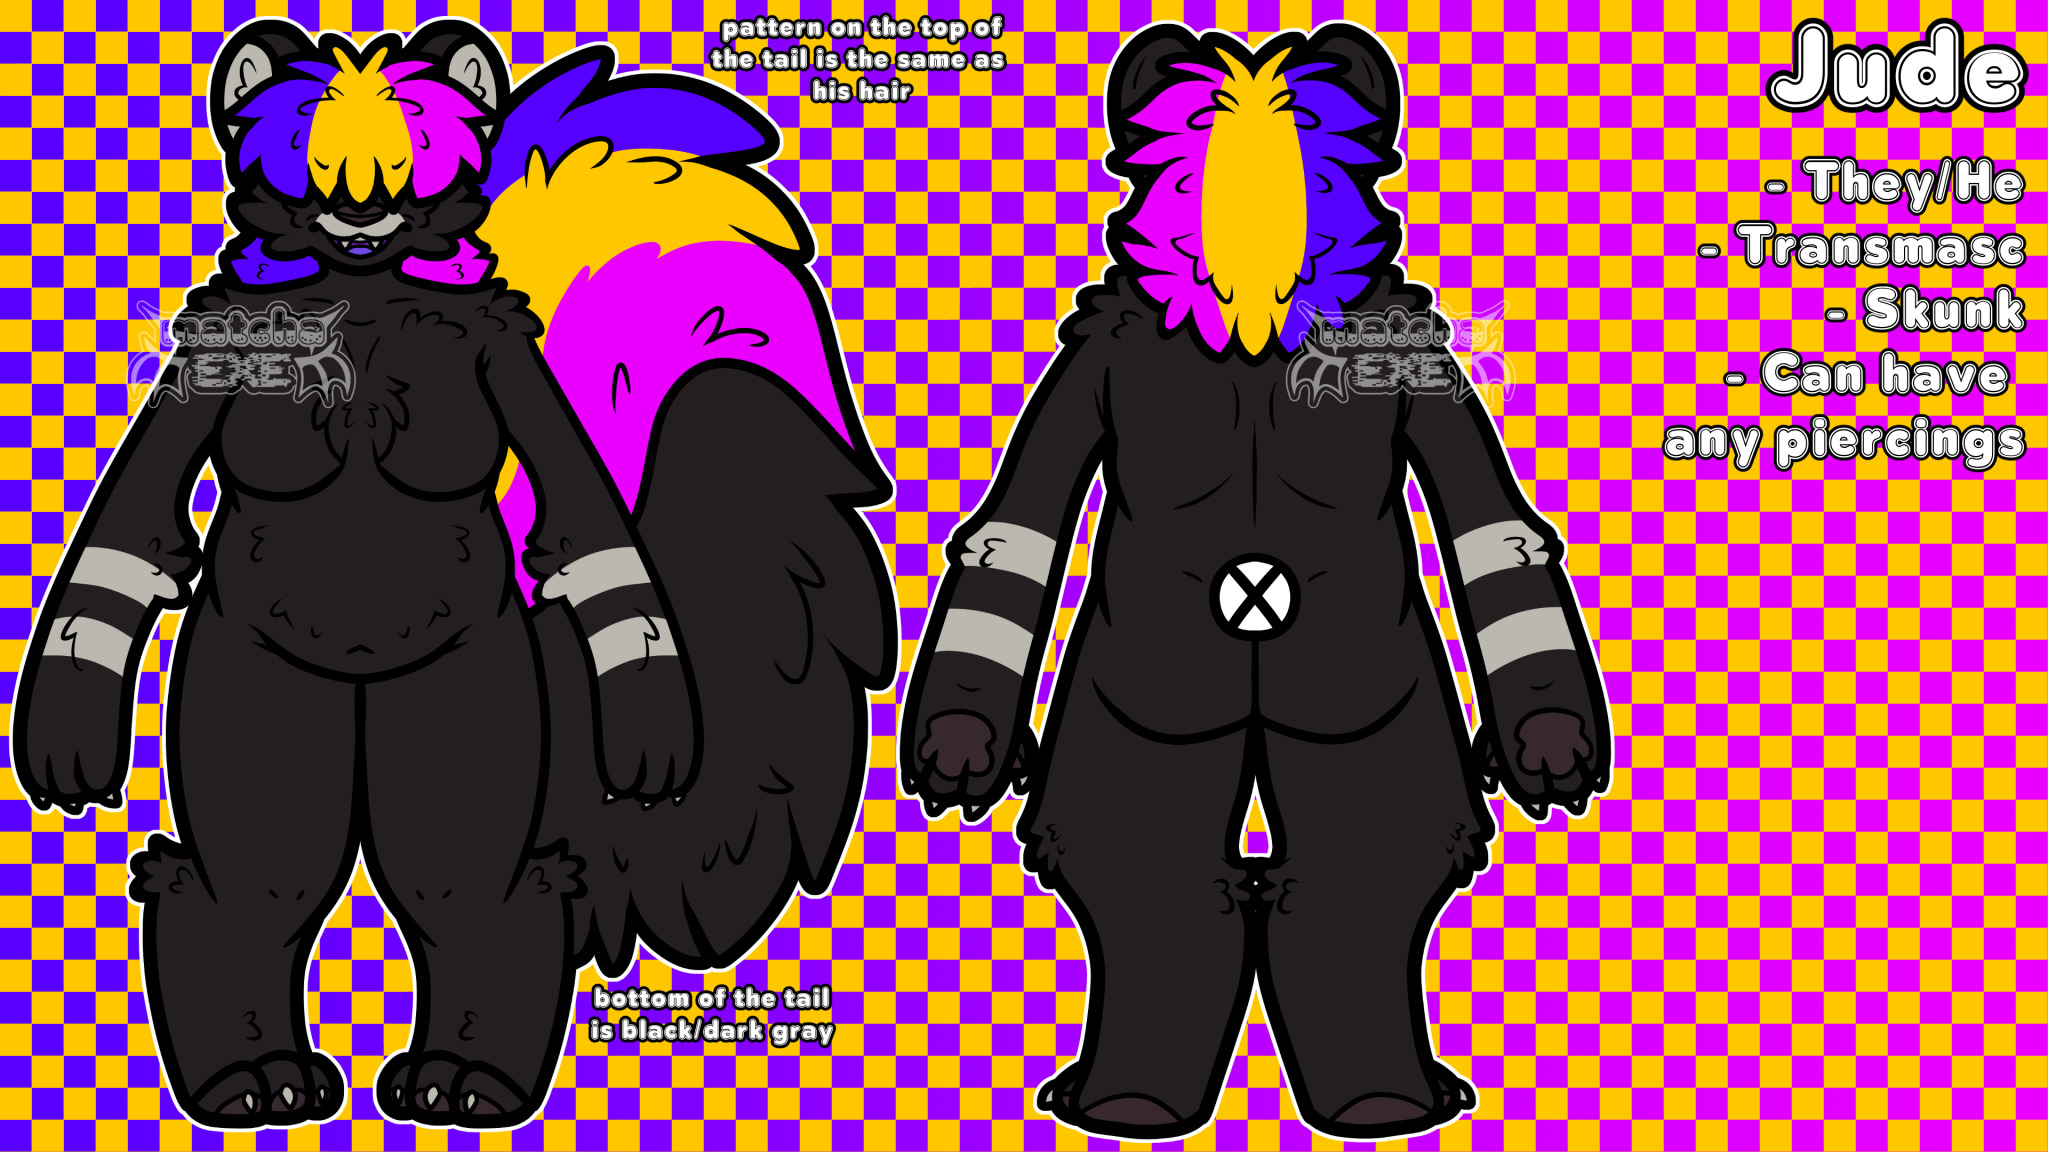 A reference image of Jude the skunk.